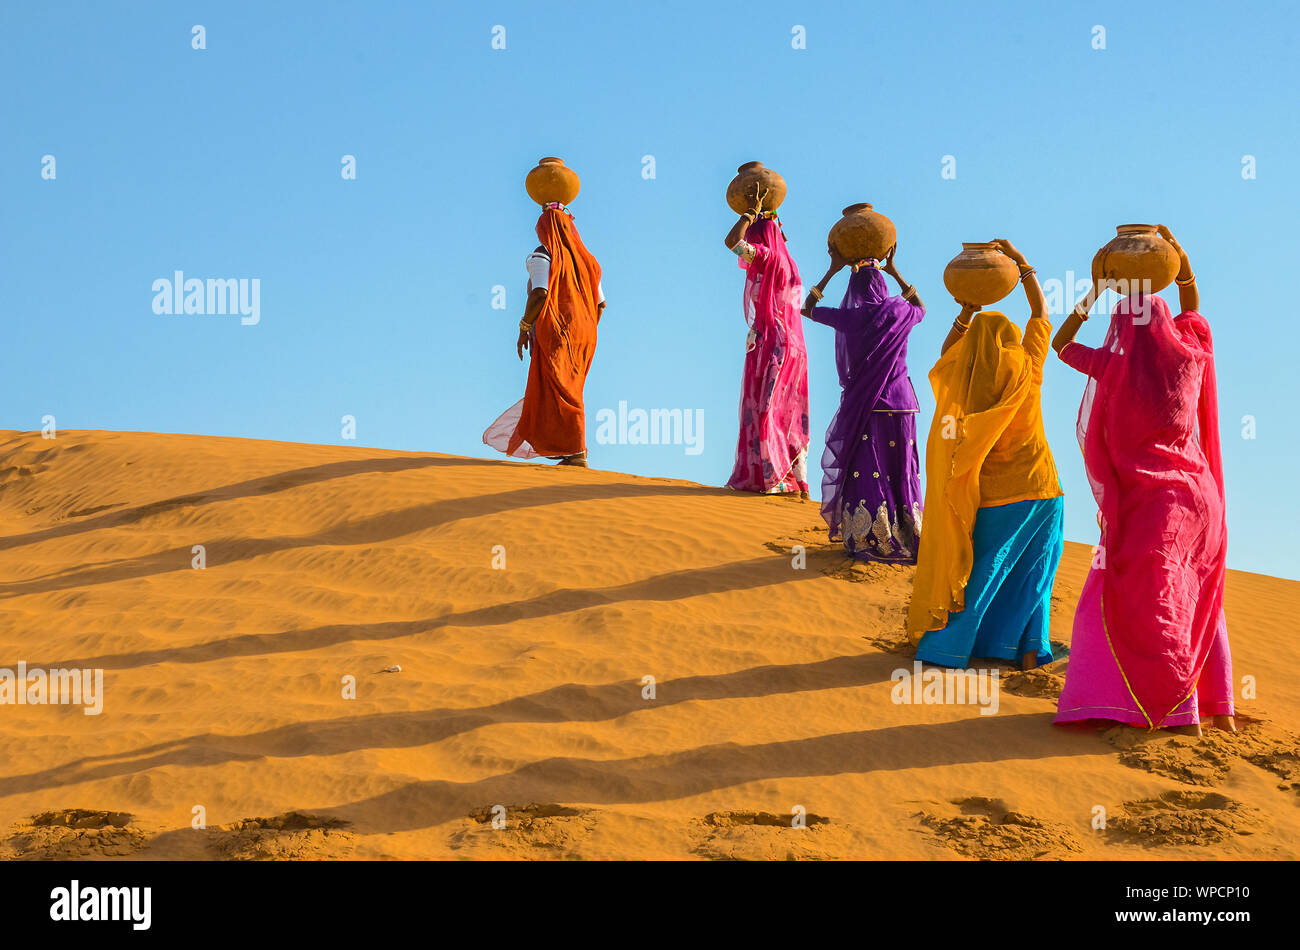 Jaisalmer, rajasthan, india - april 18th, 2018: women carrying heavy jugs of water on their head and walking on a yellow sand dune in the hot summer d Stock Photo